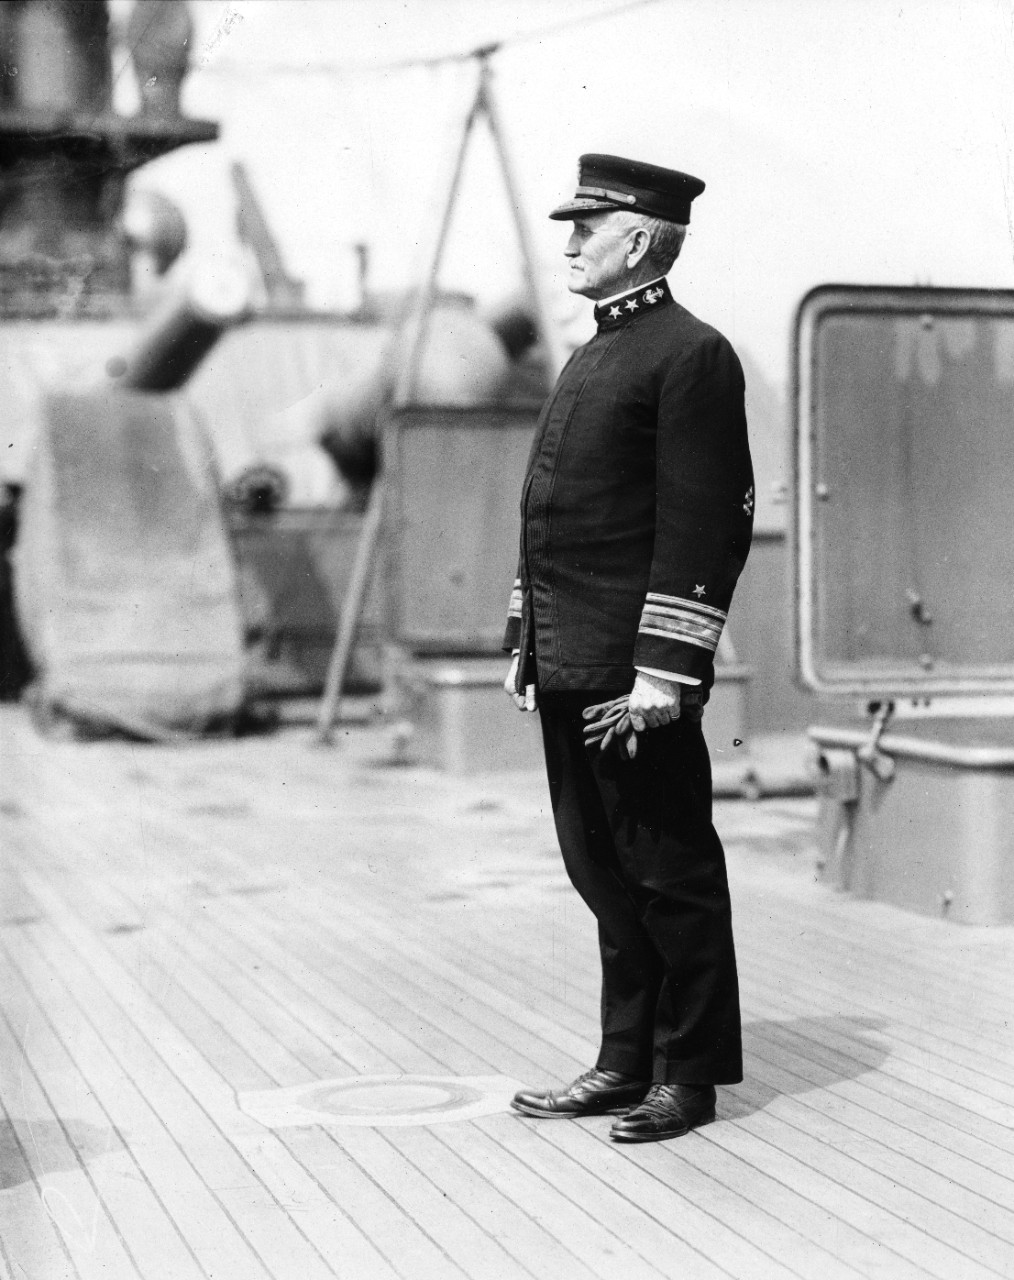 This collection of 135 photographs and several textual items consists primarily of views taken while then-Rear Admiral W.B. CAPERTON, USN, was CinC Pacific Fleet, c. 1918 and Commander, Cruiser Squadron, Atlantic Fleet, c. 1915-1916. The majority of views are of people and places in Haiti and South America, many in postcard form. There is only a limited selection of images of Caperton and U.S. Navy subjects. Many photos have been assigned NH numbers. Booklet and magazine transferred to Navy Department Library. 